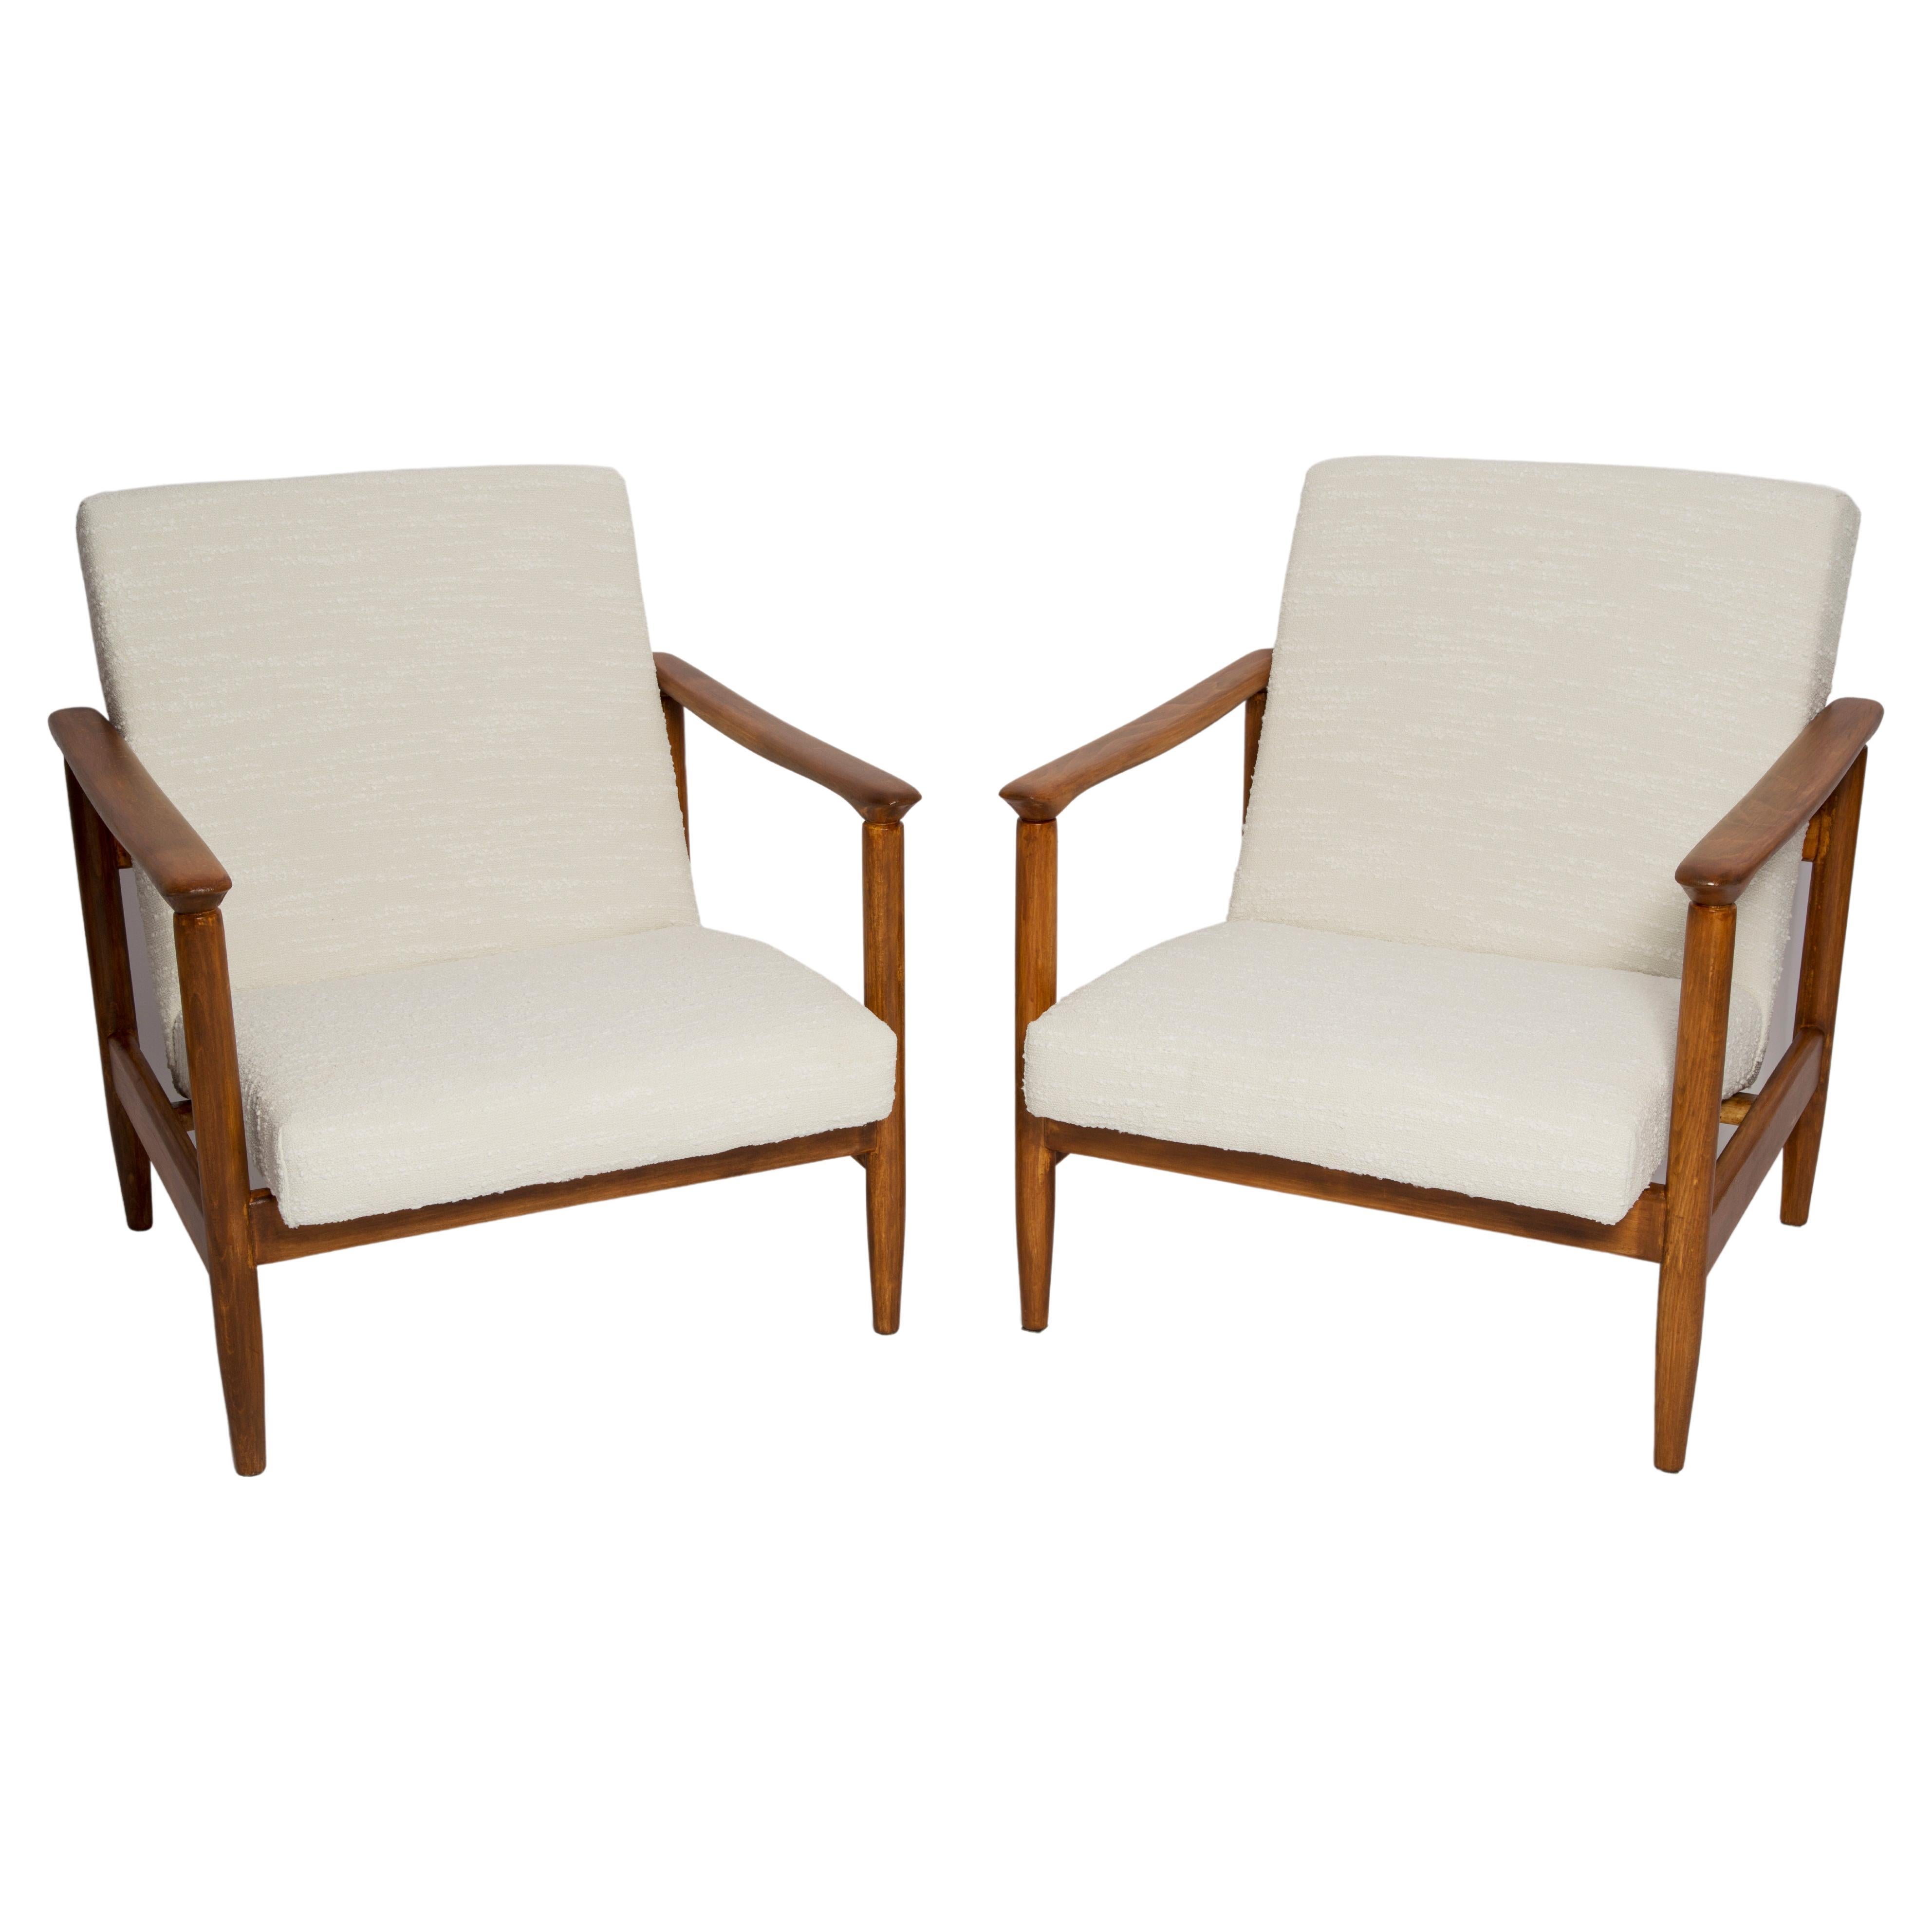 Pair of Mid Century White Boucle Armchairs, GFM 142, Edmund Homa, Europe, 1960s For Sale